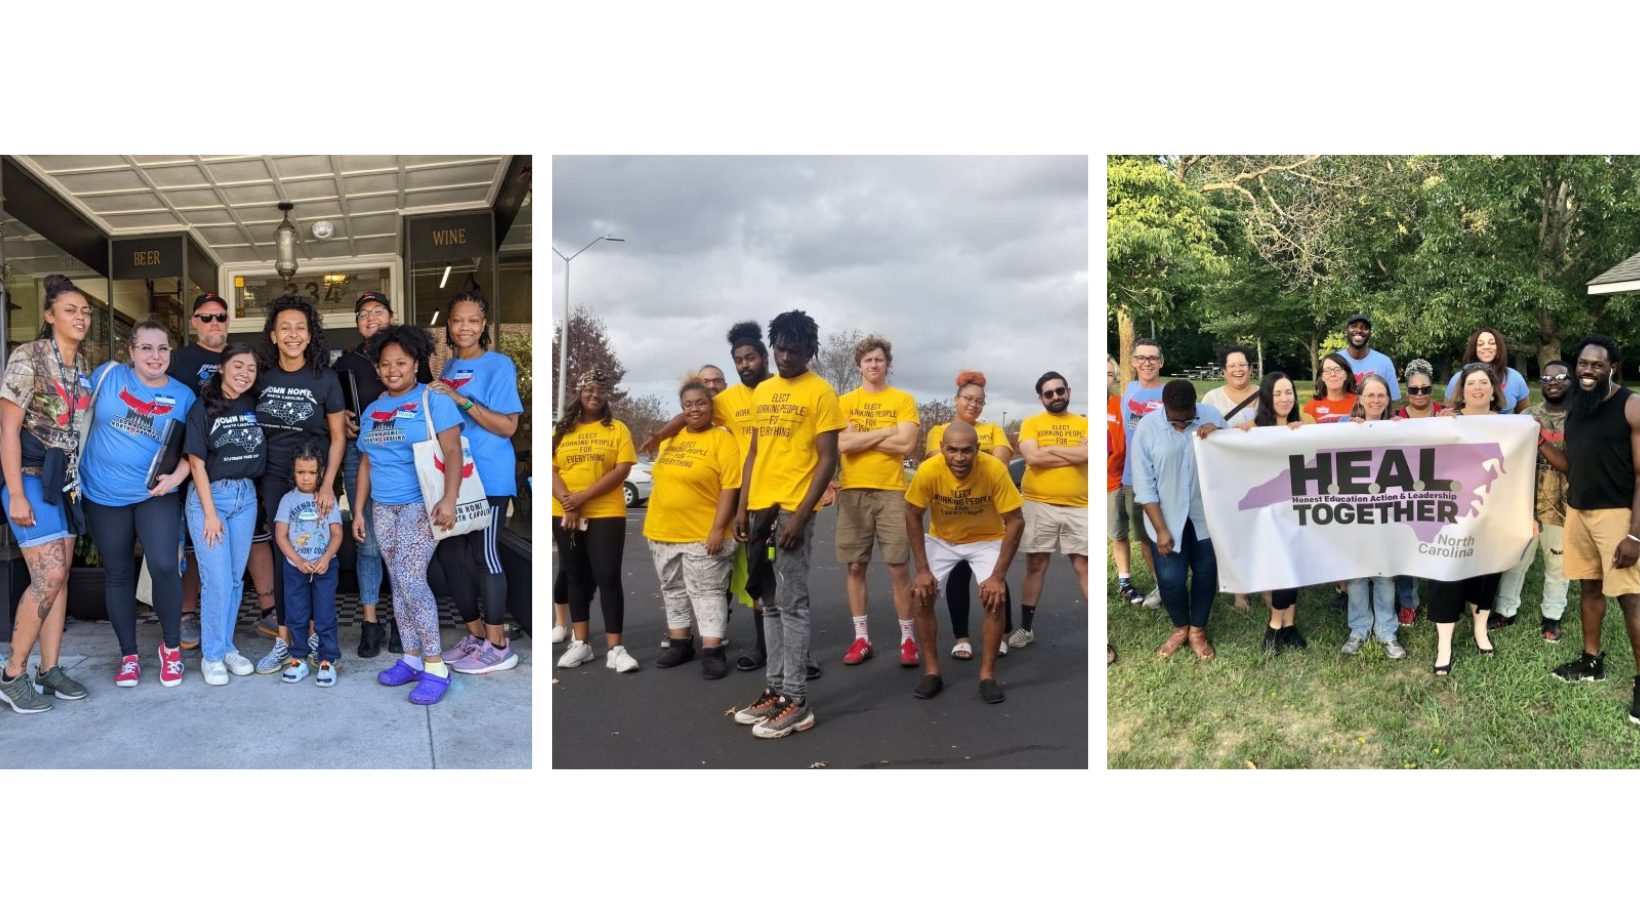 From left to right: Members of the Johnston County chapter; members of the Granville chapter after canvassing; a group of HEAL Together public school advocates, standing together in solidarity for quality education.